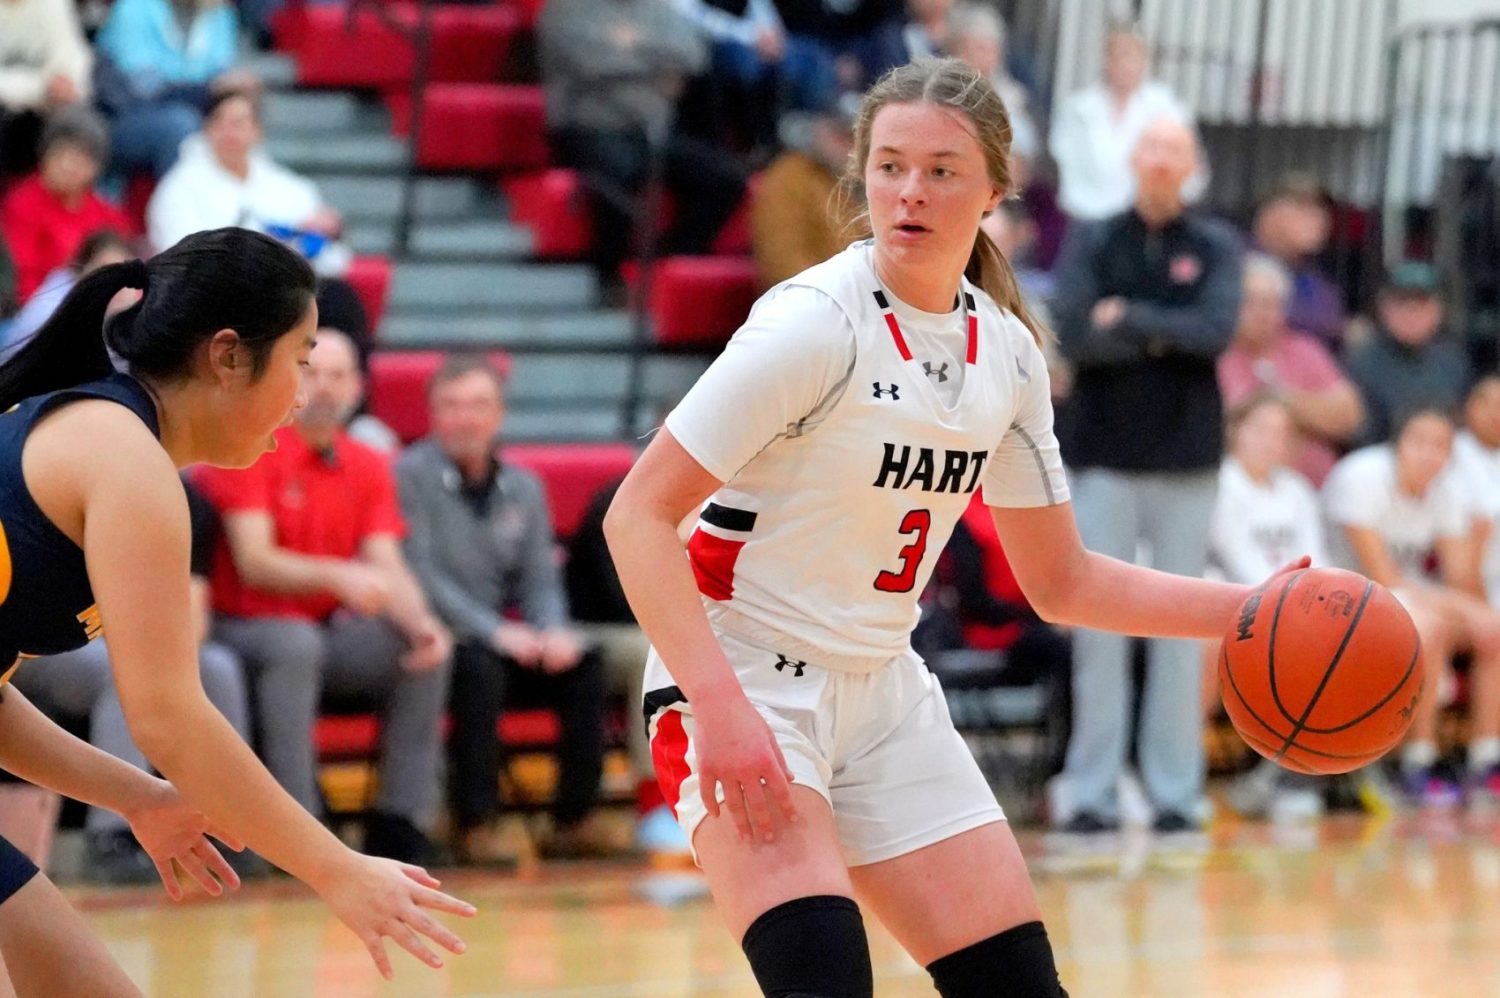 Boutell, Hicks lead Hart to big win over Manistee